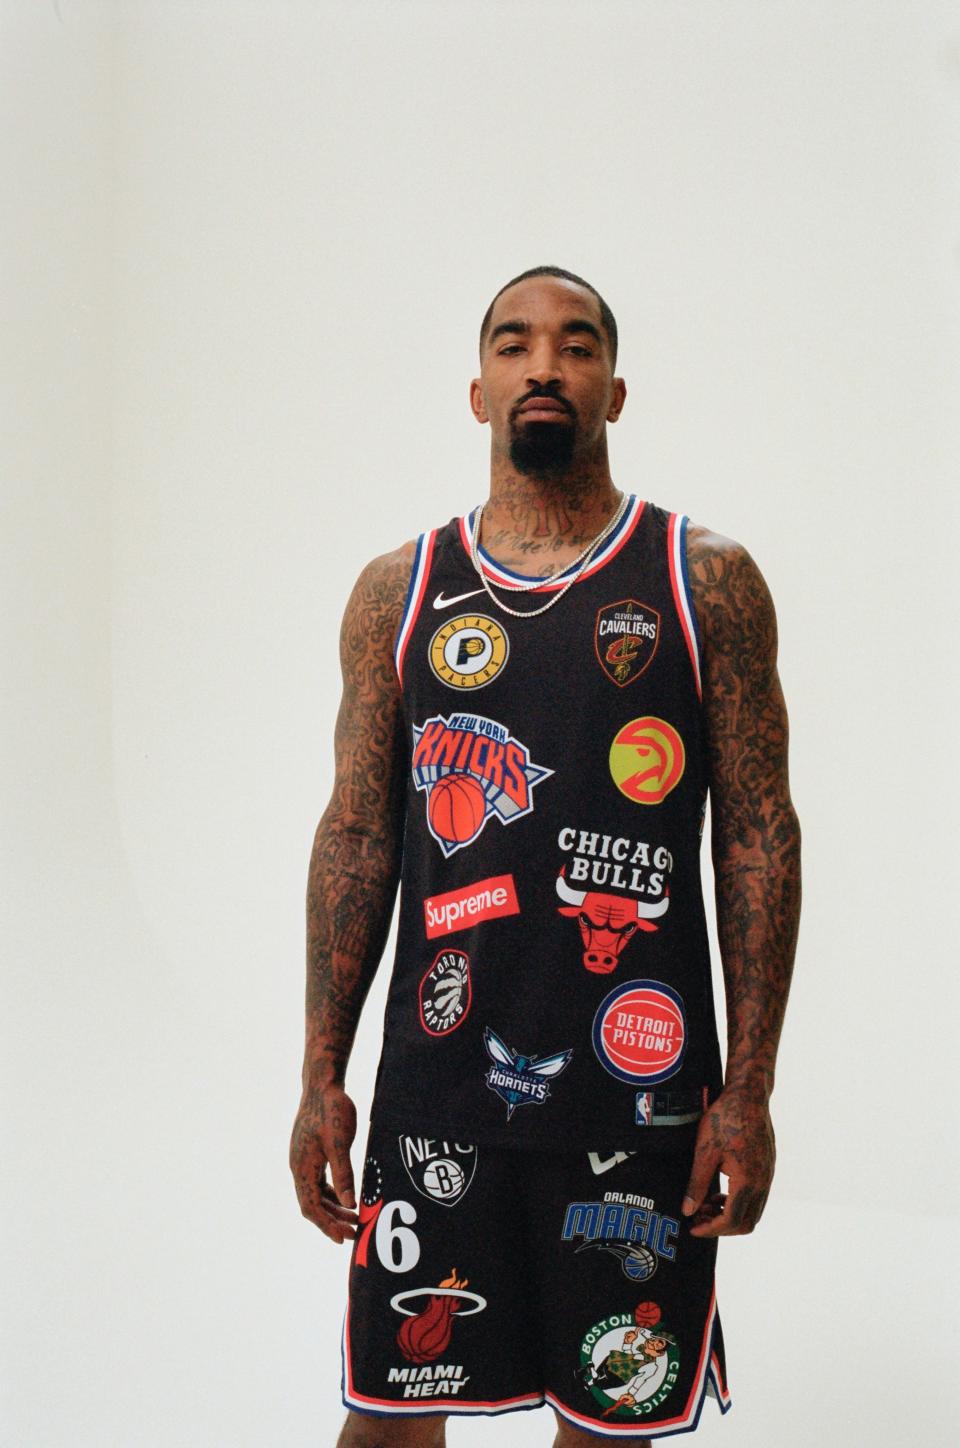 Supreme revives the spirit of NBA jeans.